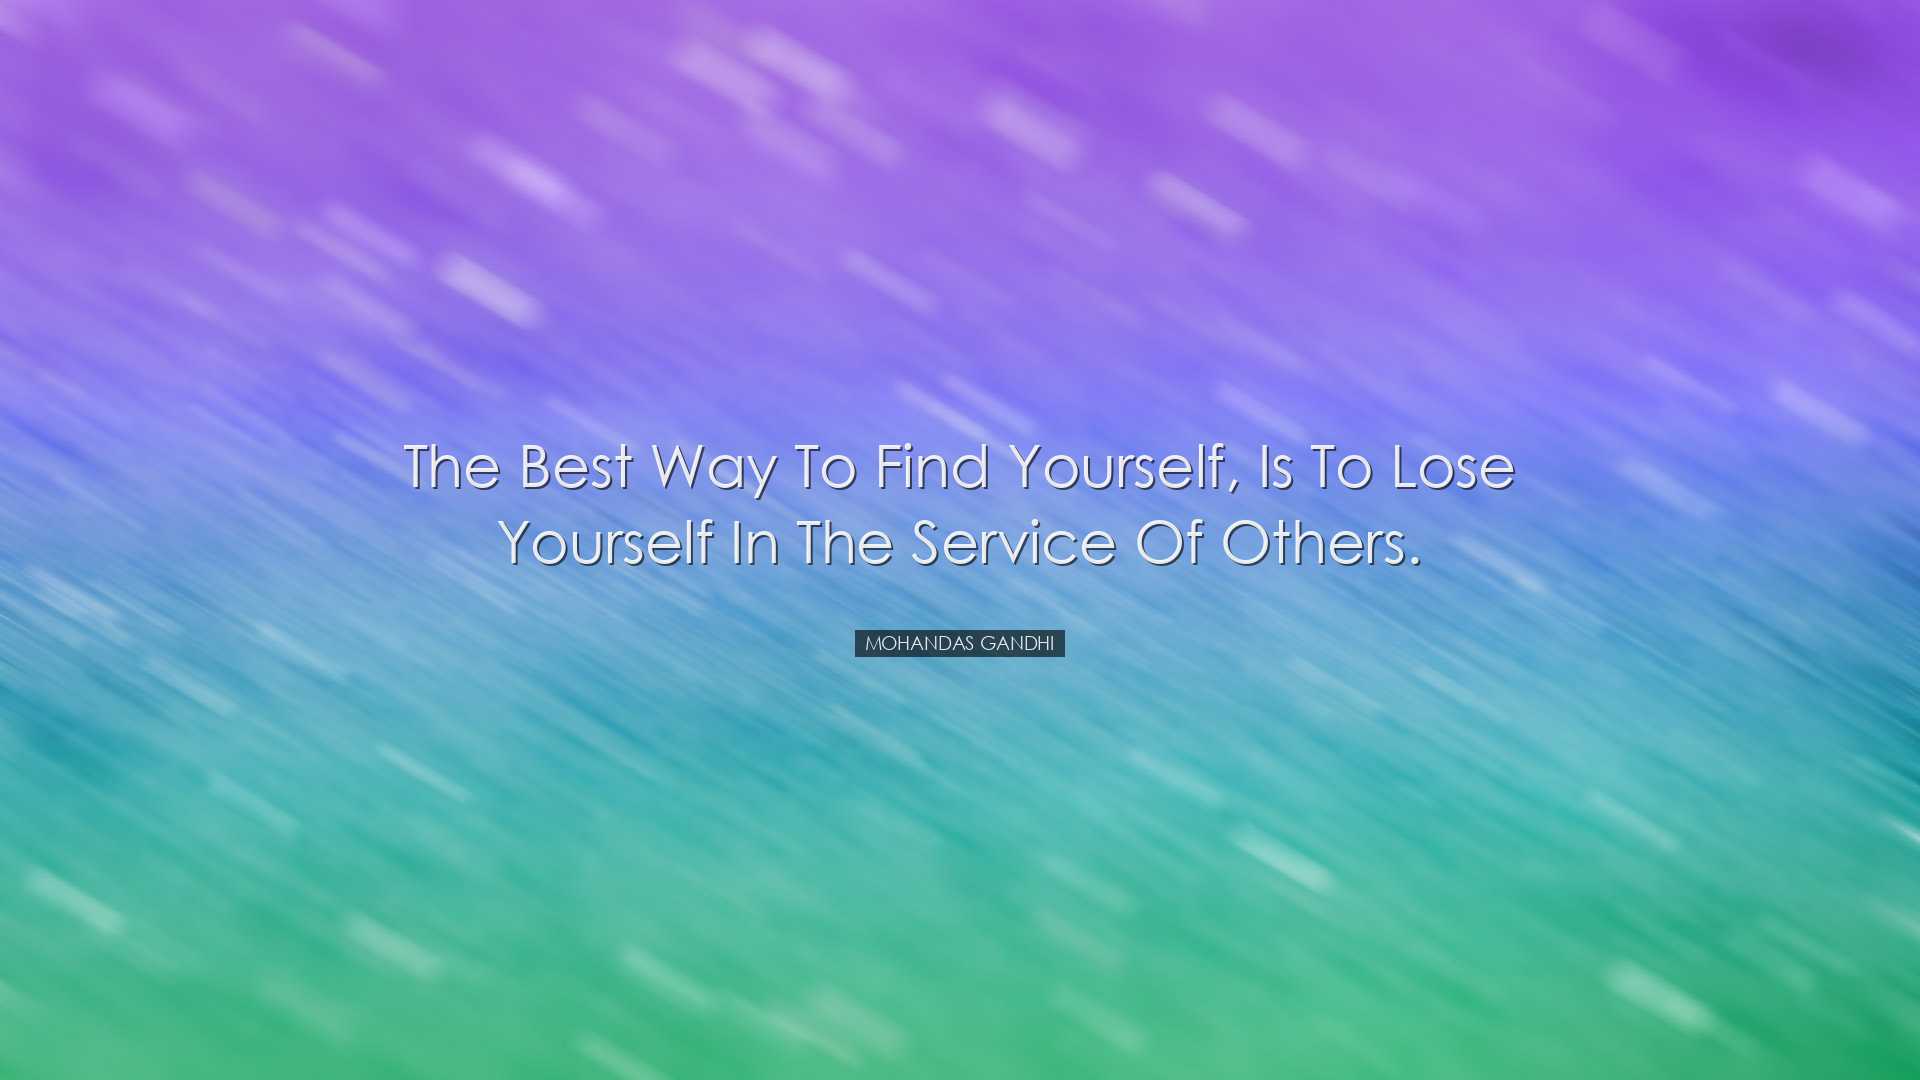 The best way to find yourself, is to lose yourself in the service